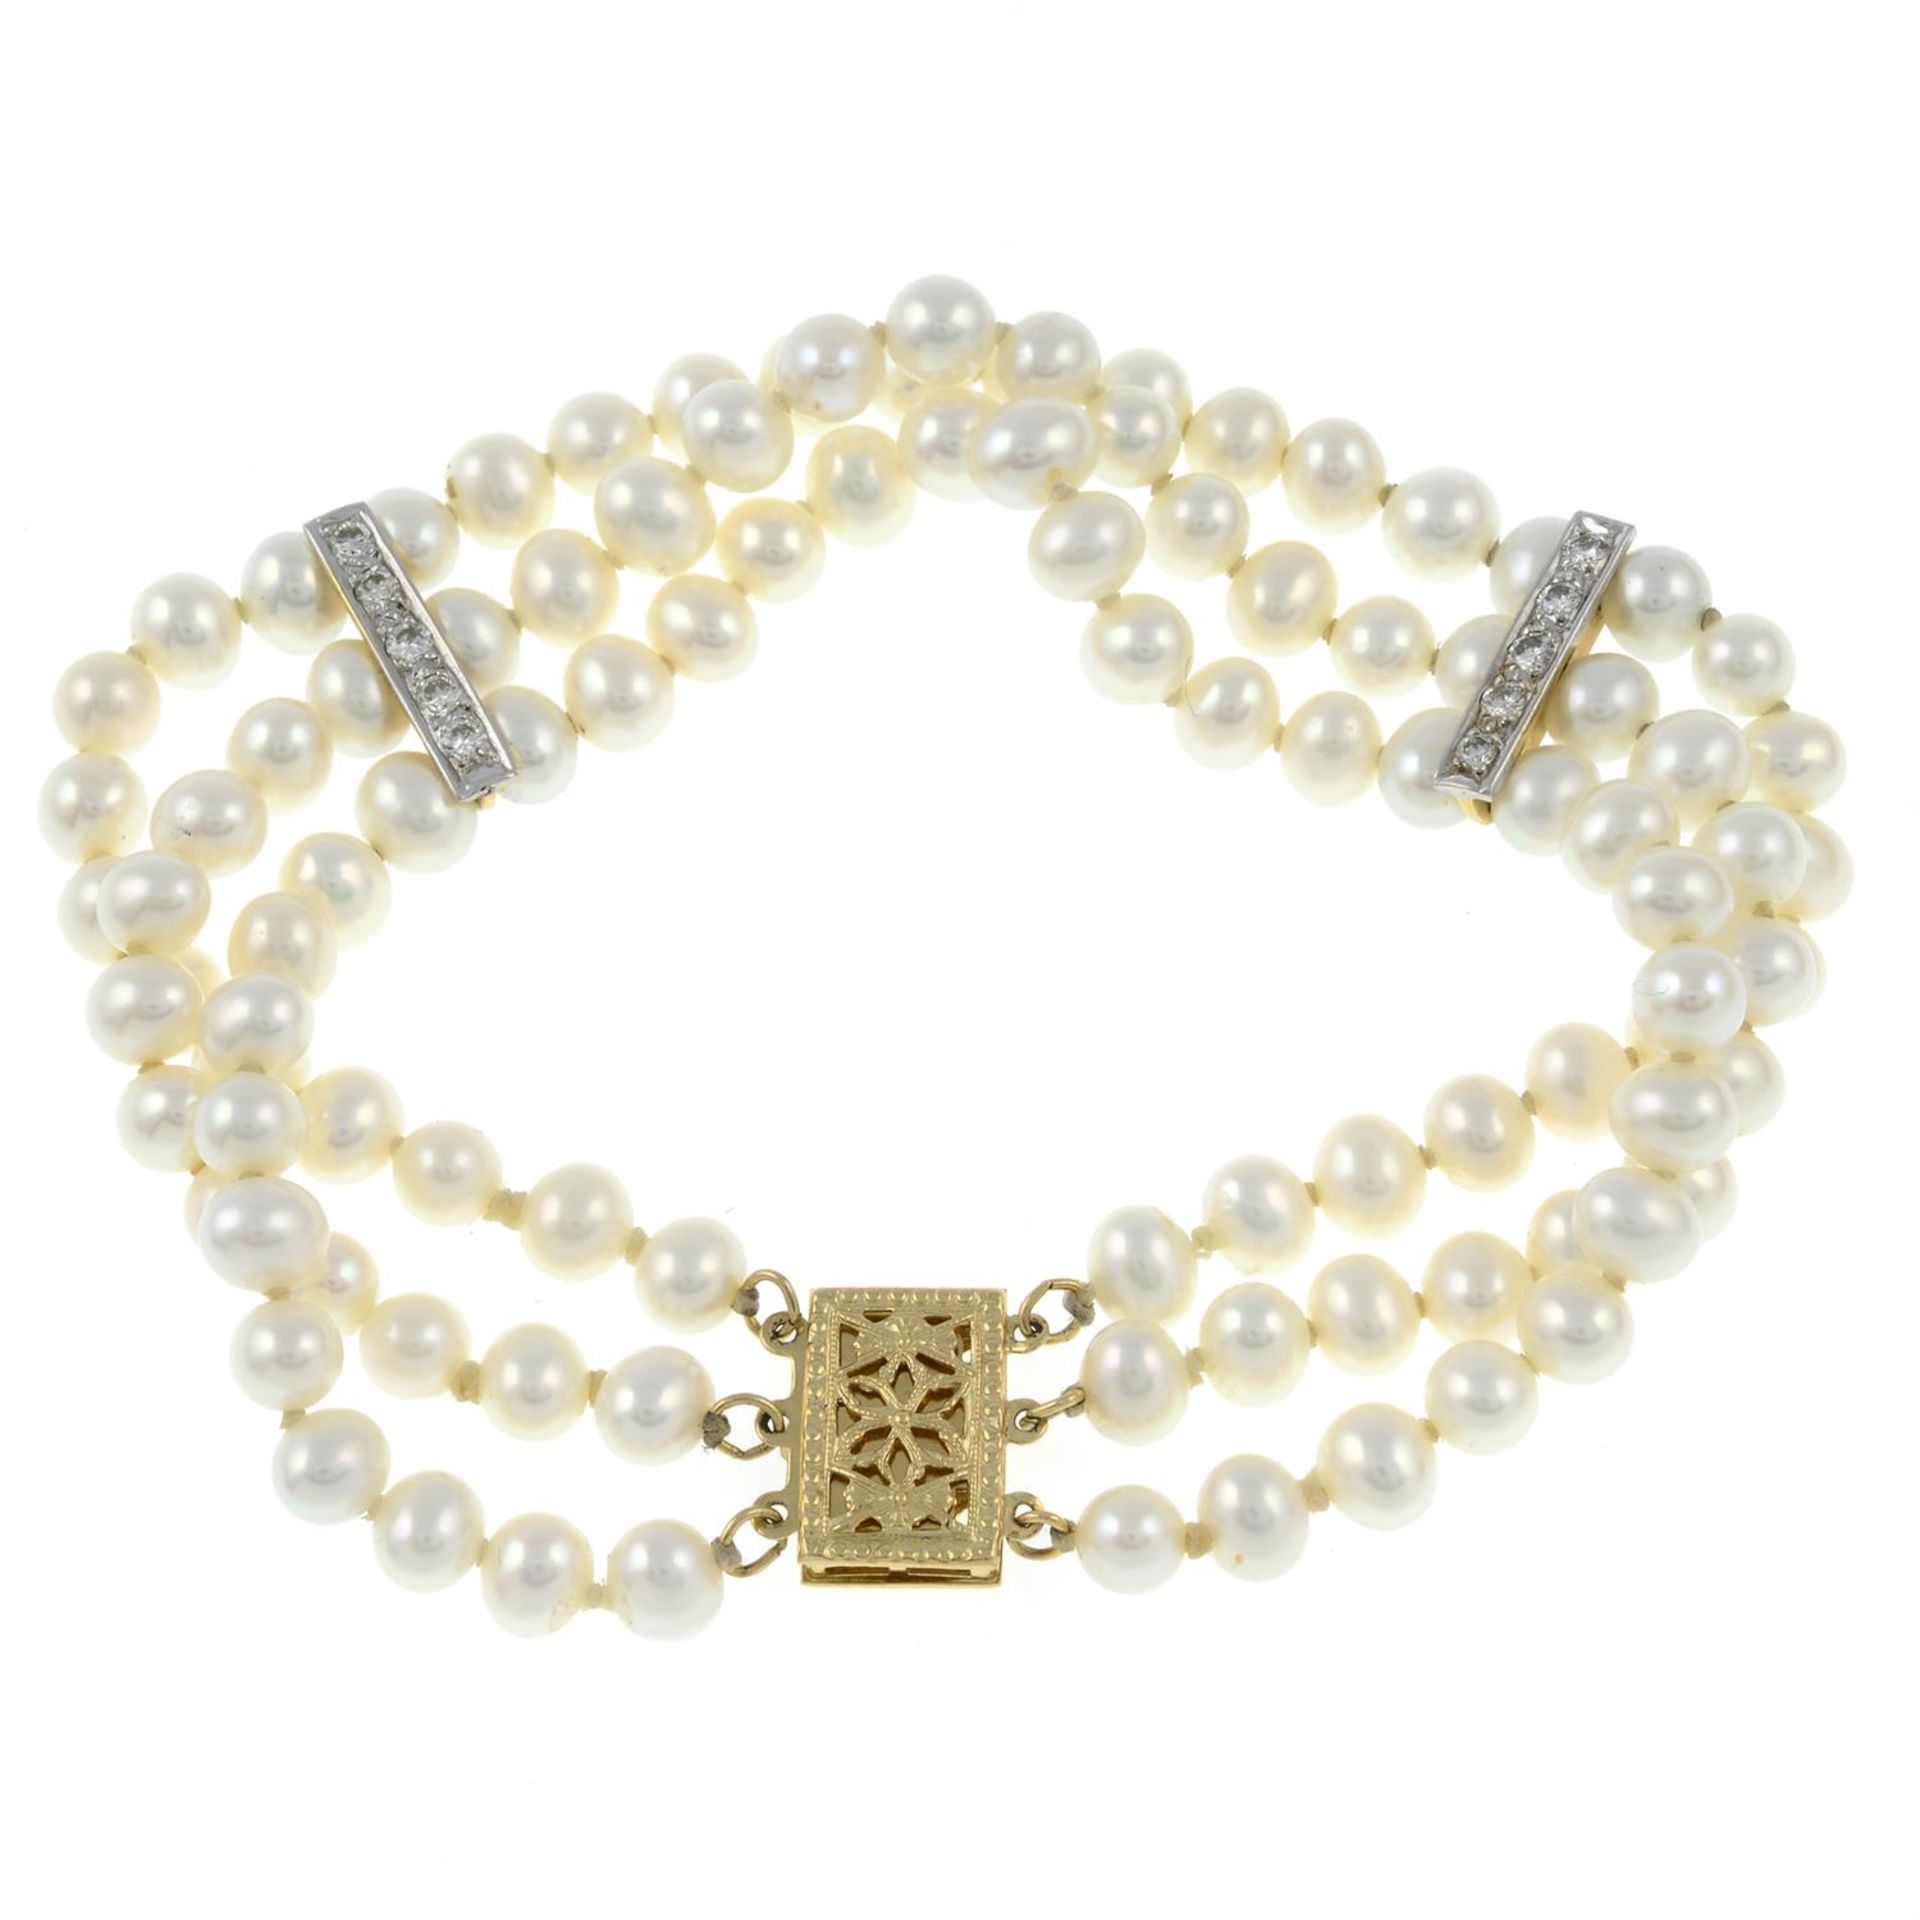 A cultured pearl three-row bracelet, with diamond line spacers and openwork clasp. - Image 2 of 3